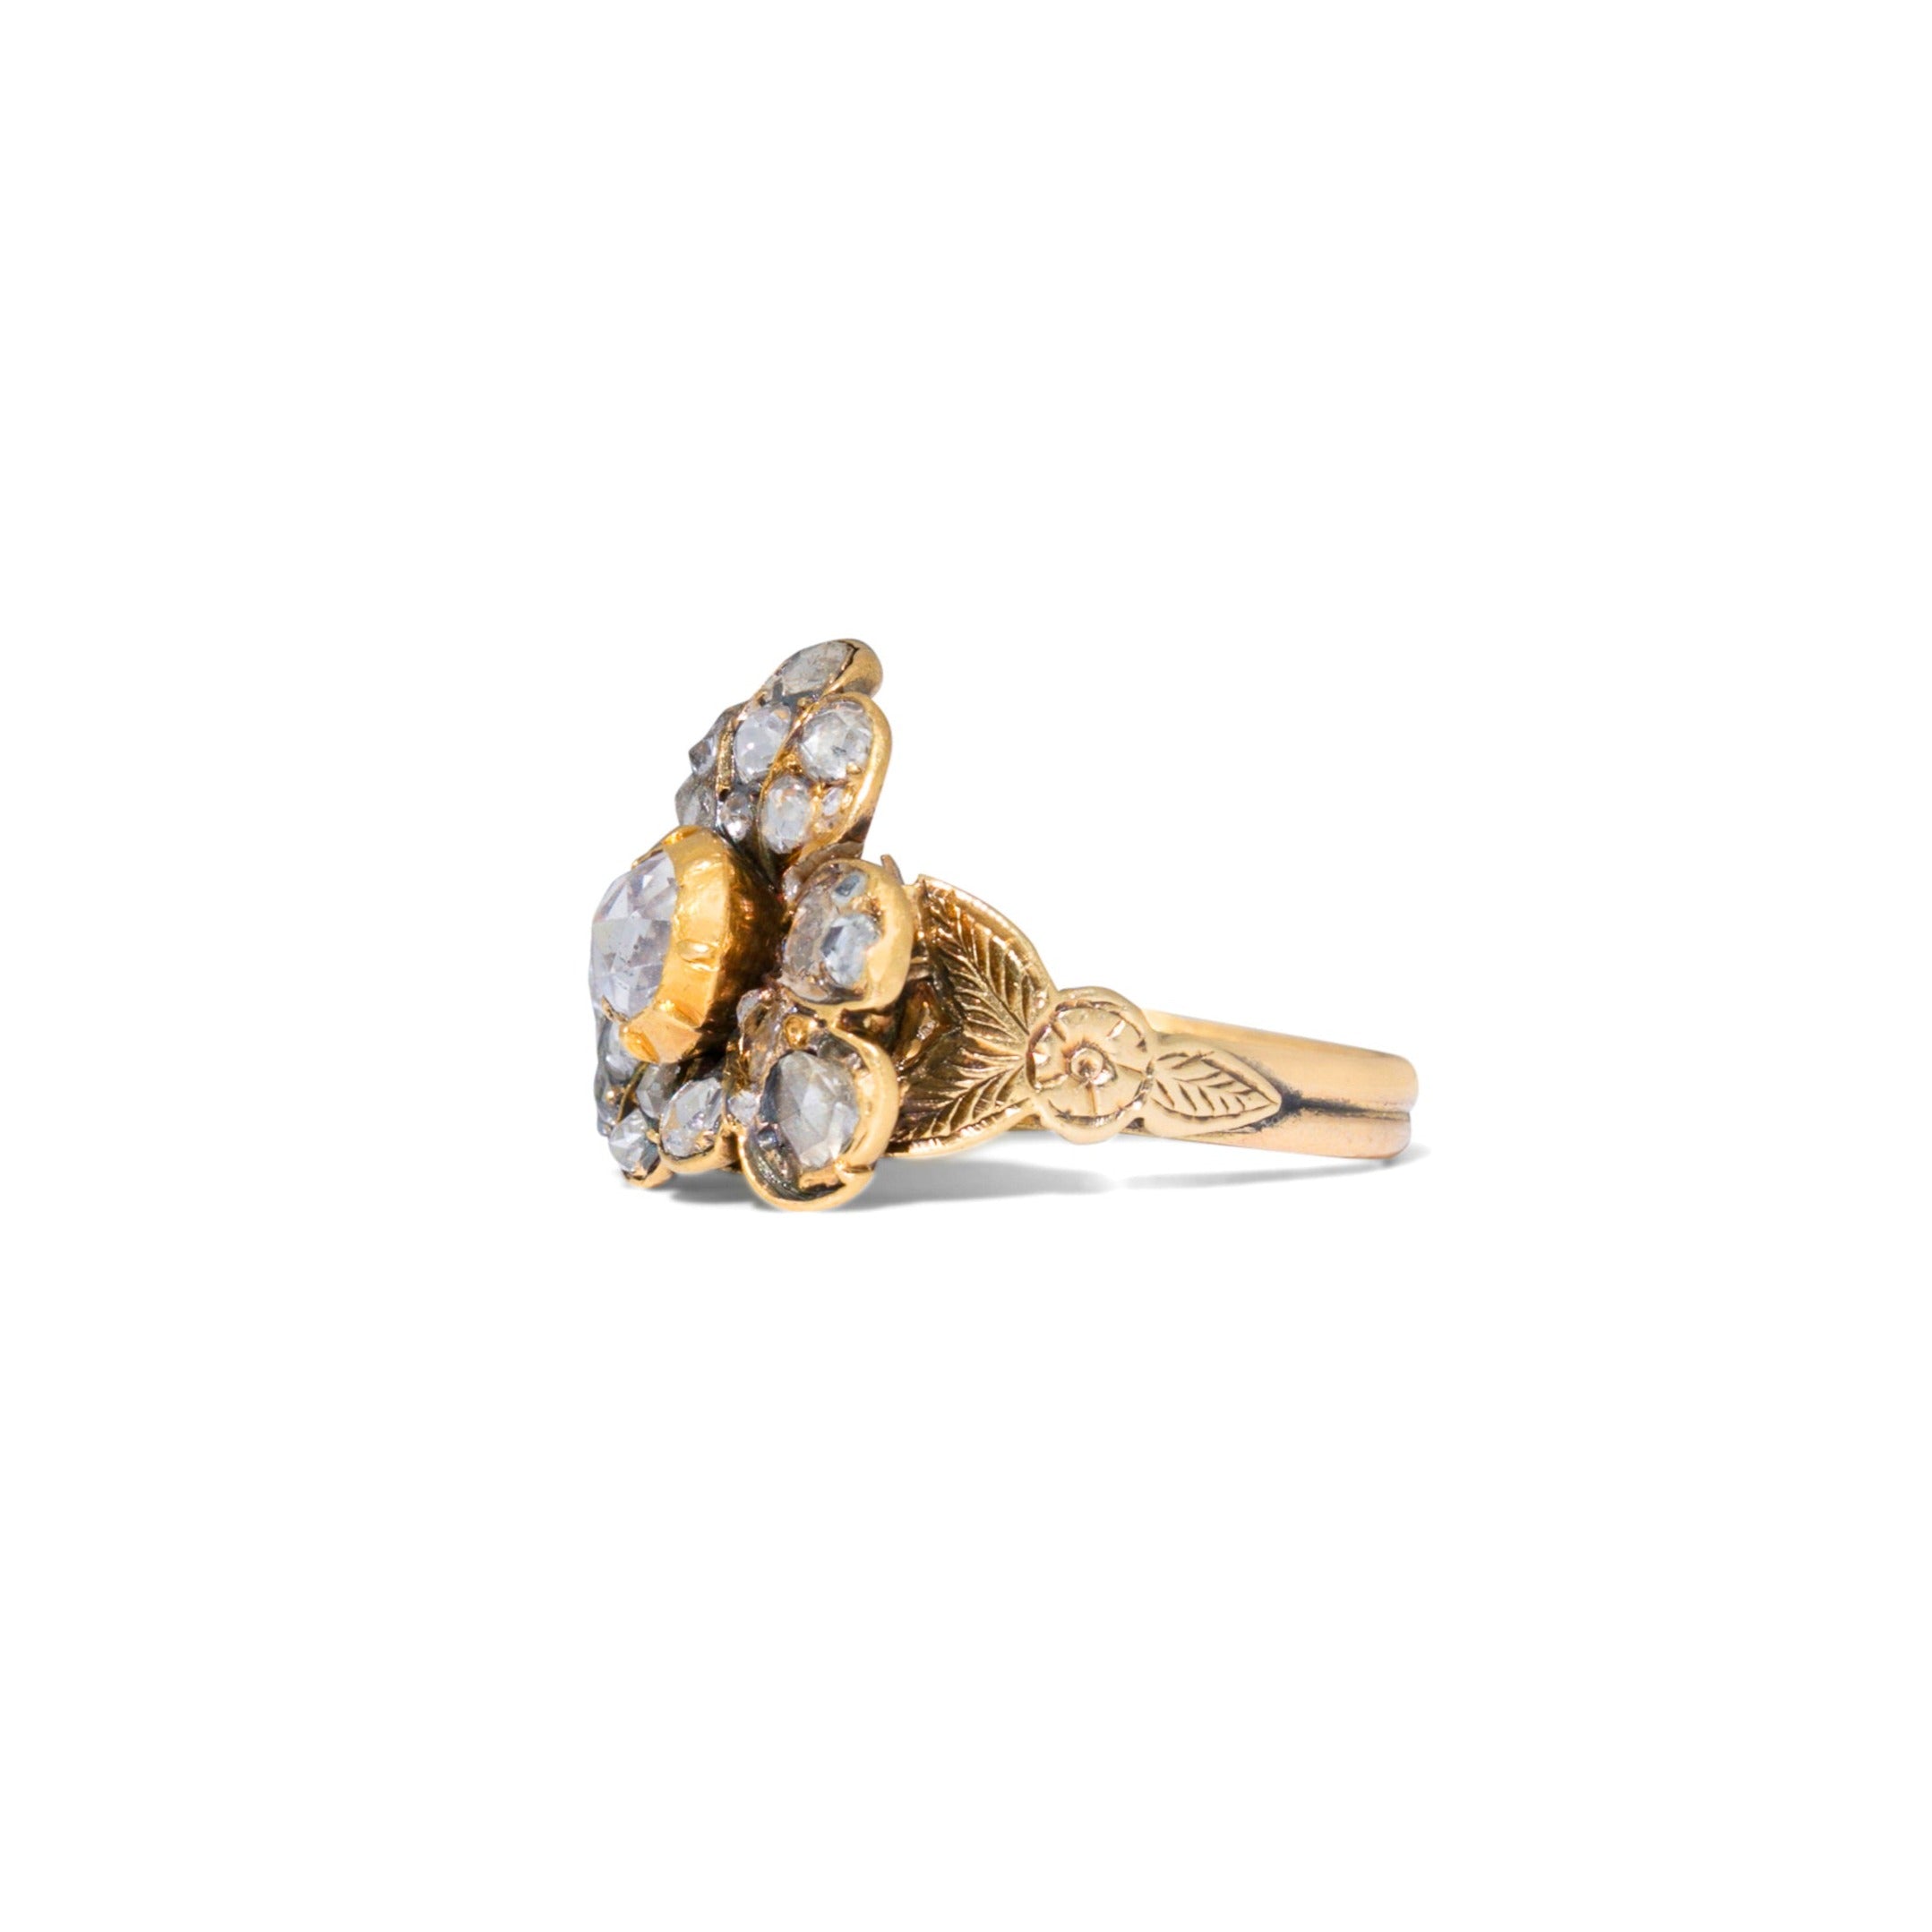 Victorian Rose Cut Diamond, 14k Gold, And Silver Floral Ring